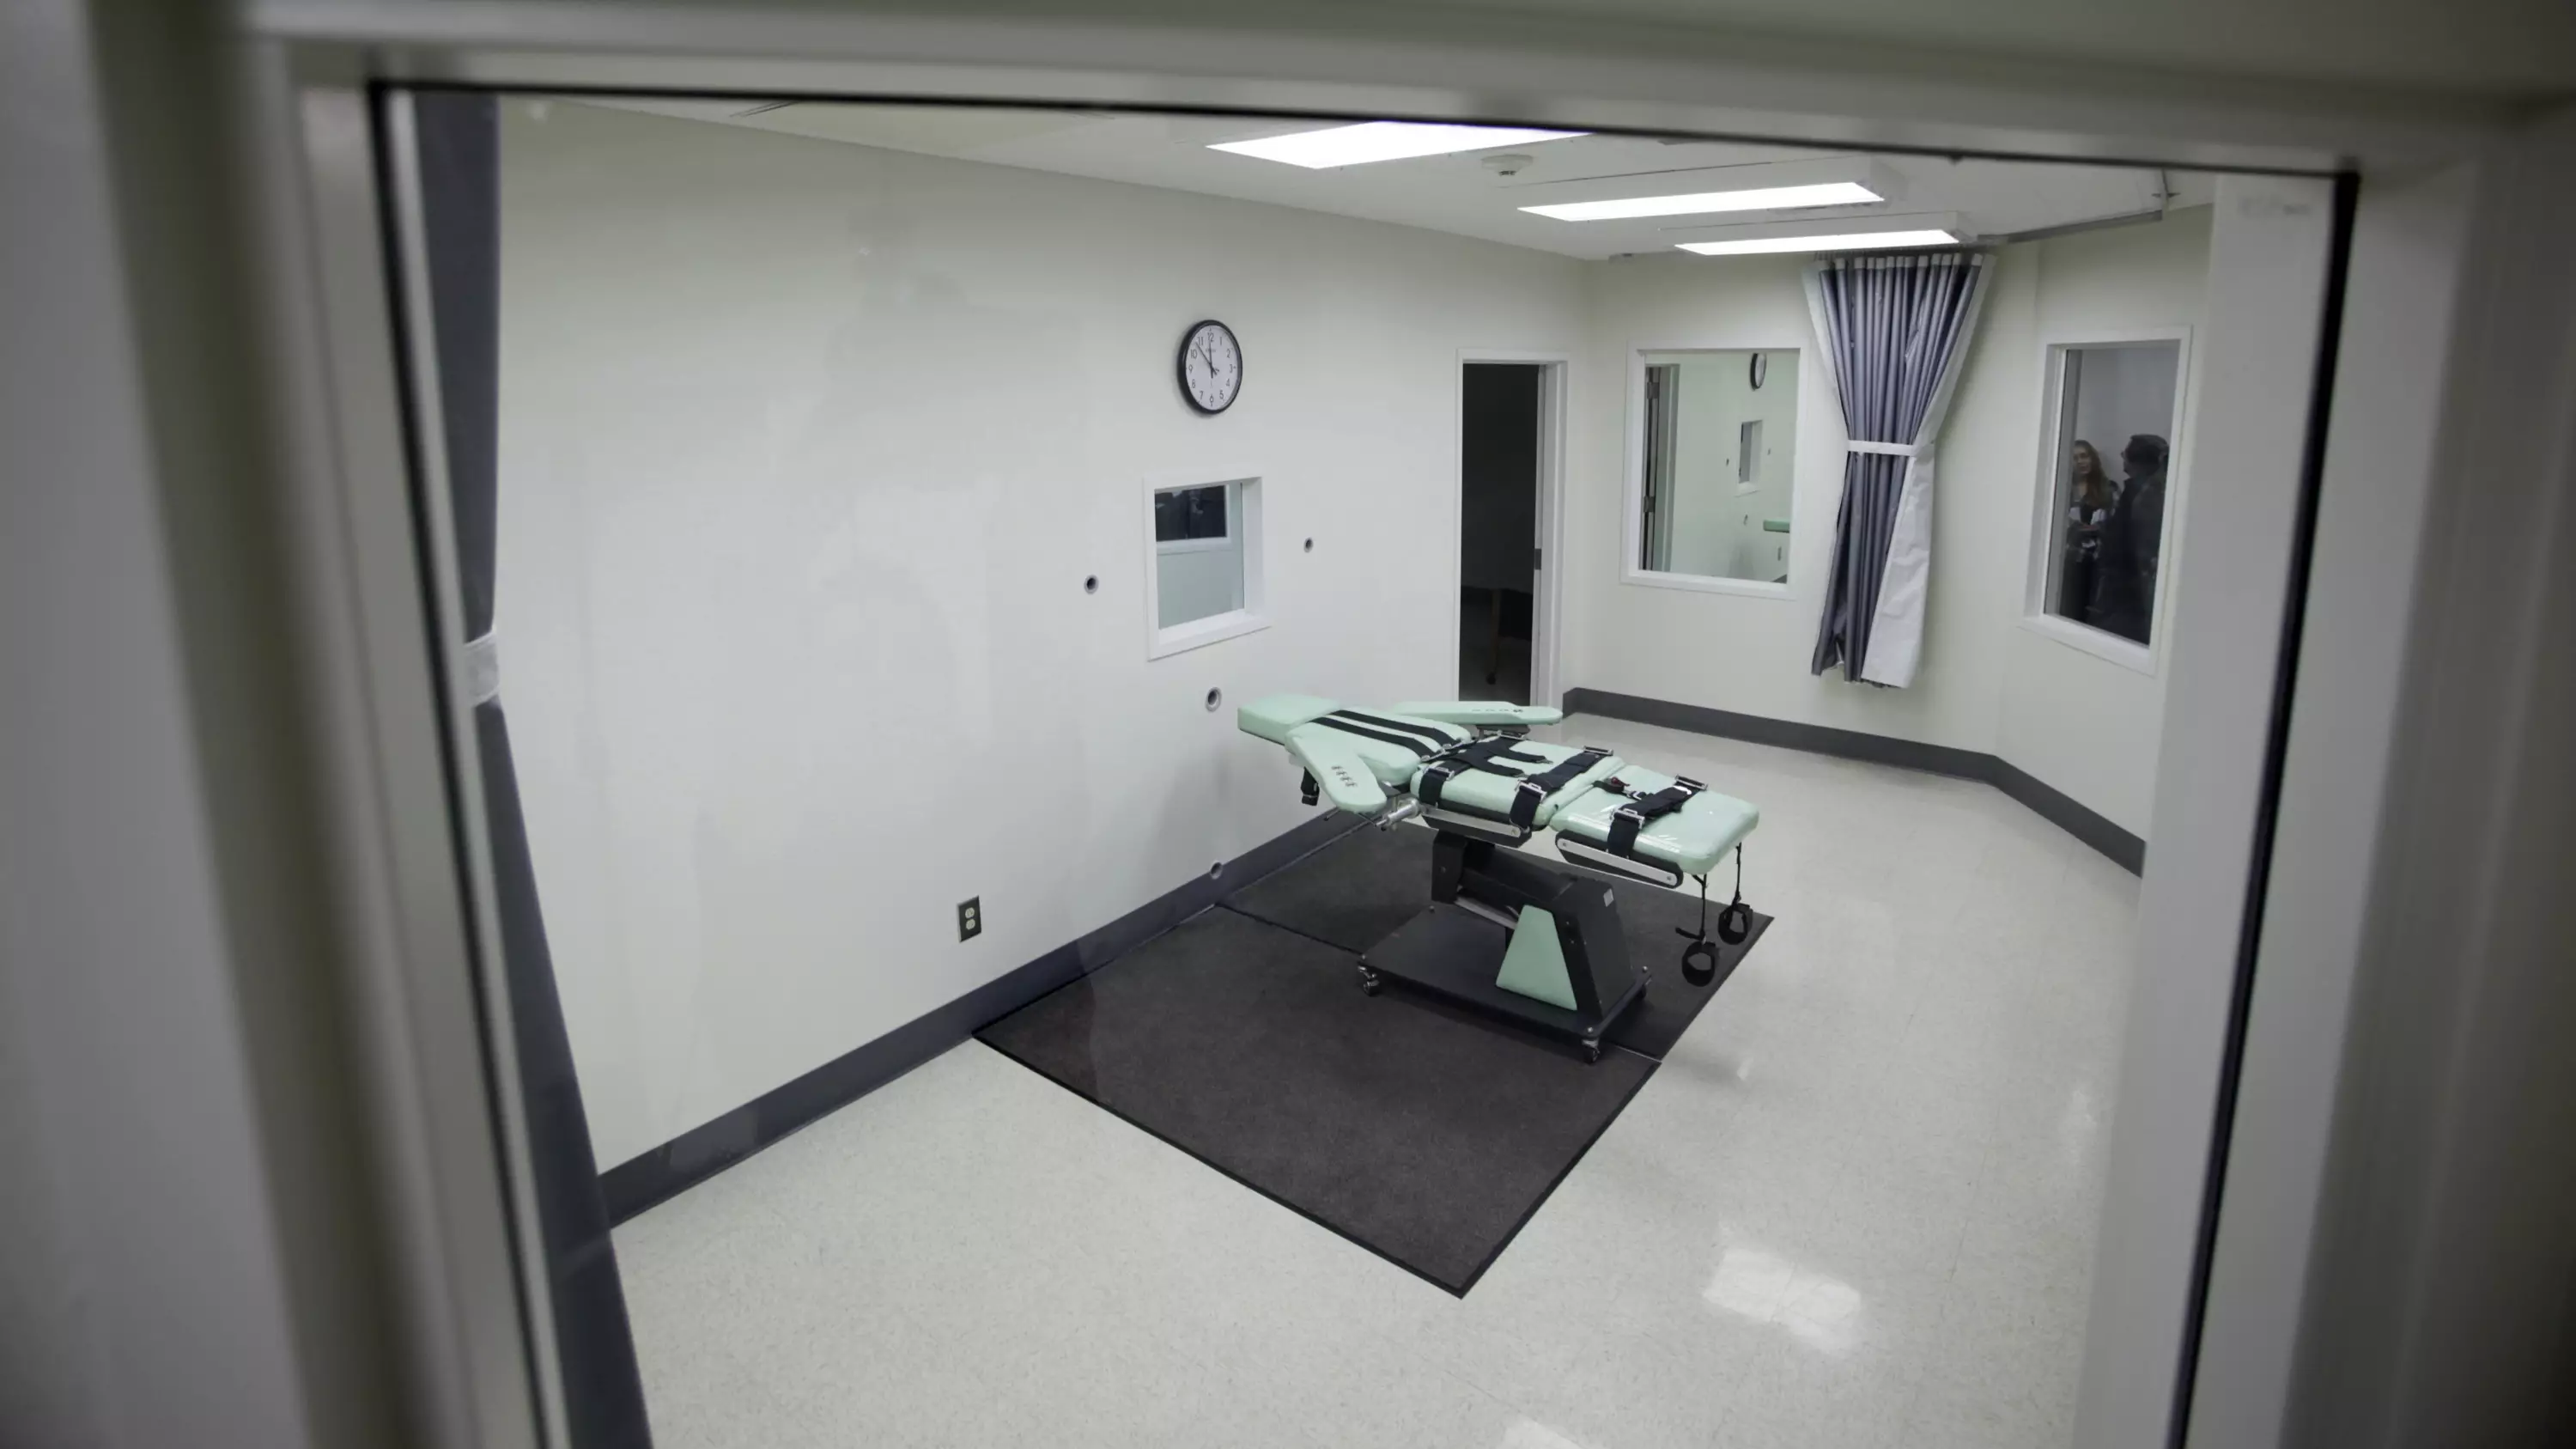 737 Death Row Inmates Saved From Execution By Governor Of California